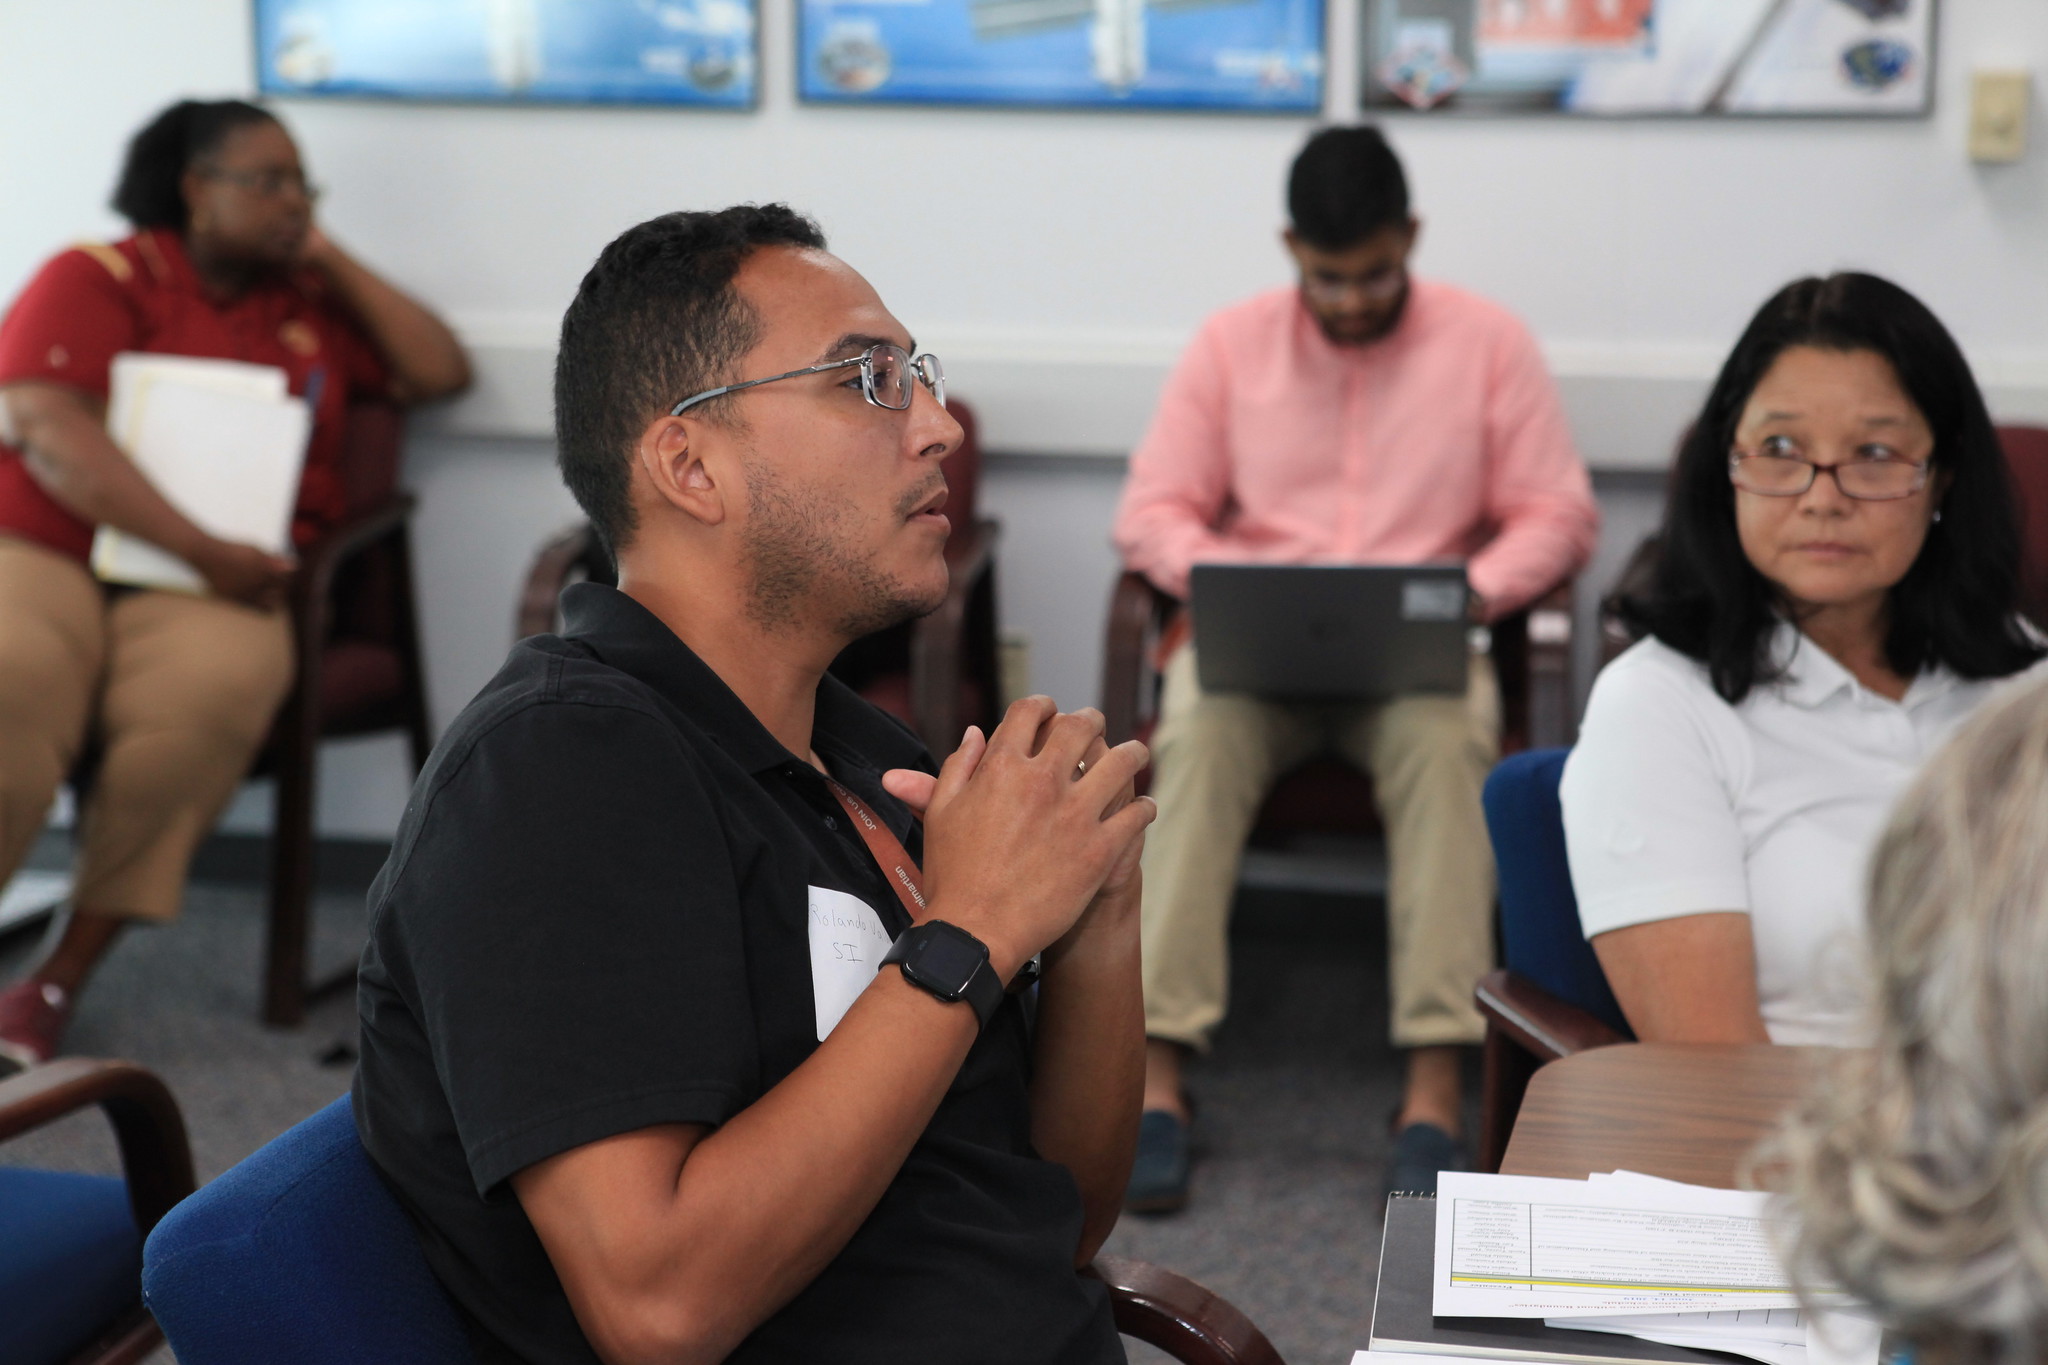 Rolando Valdez, a Kennedy employee, gives feedback to participants during the 2019 Innovation Without Boundaries event.